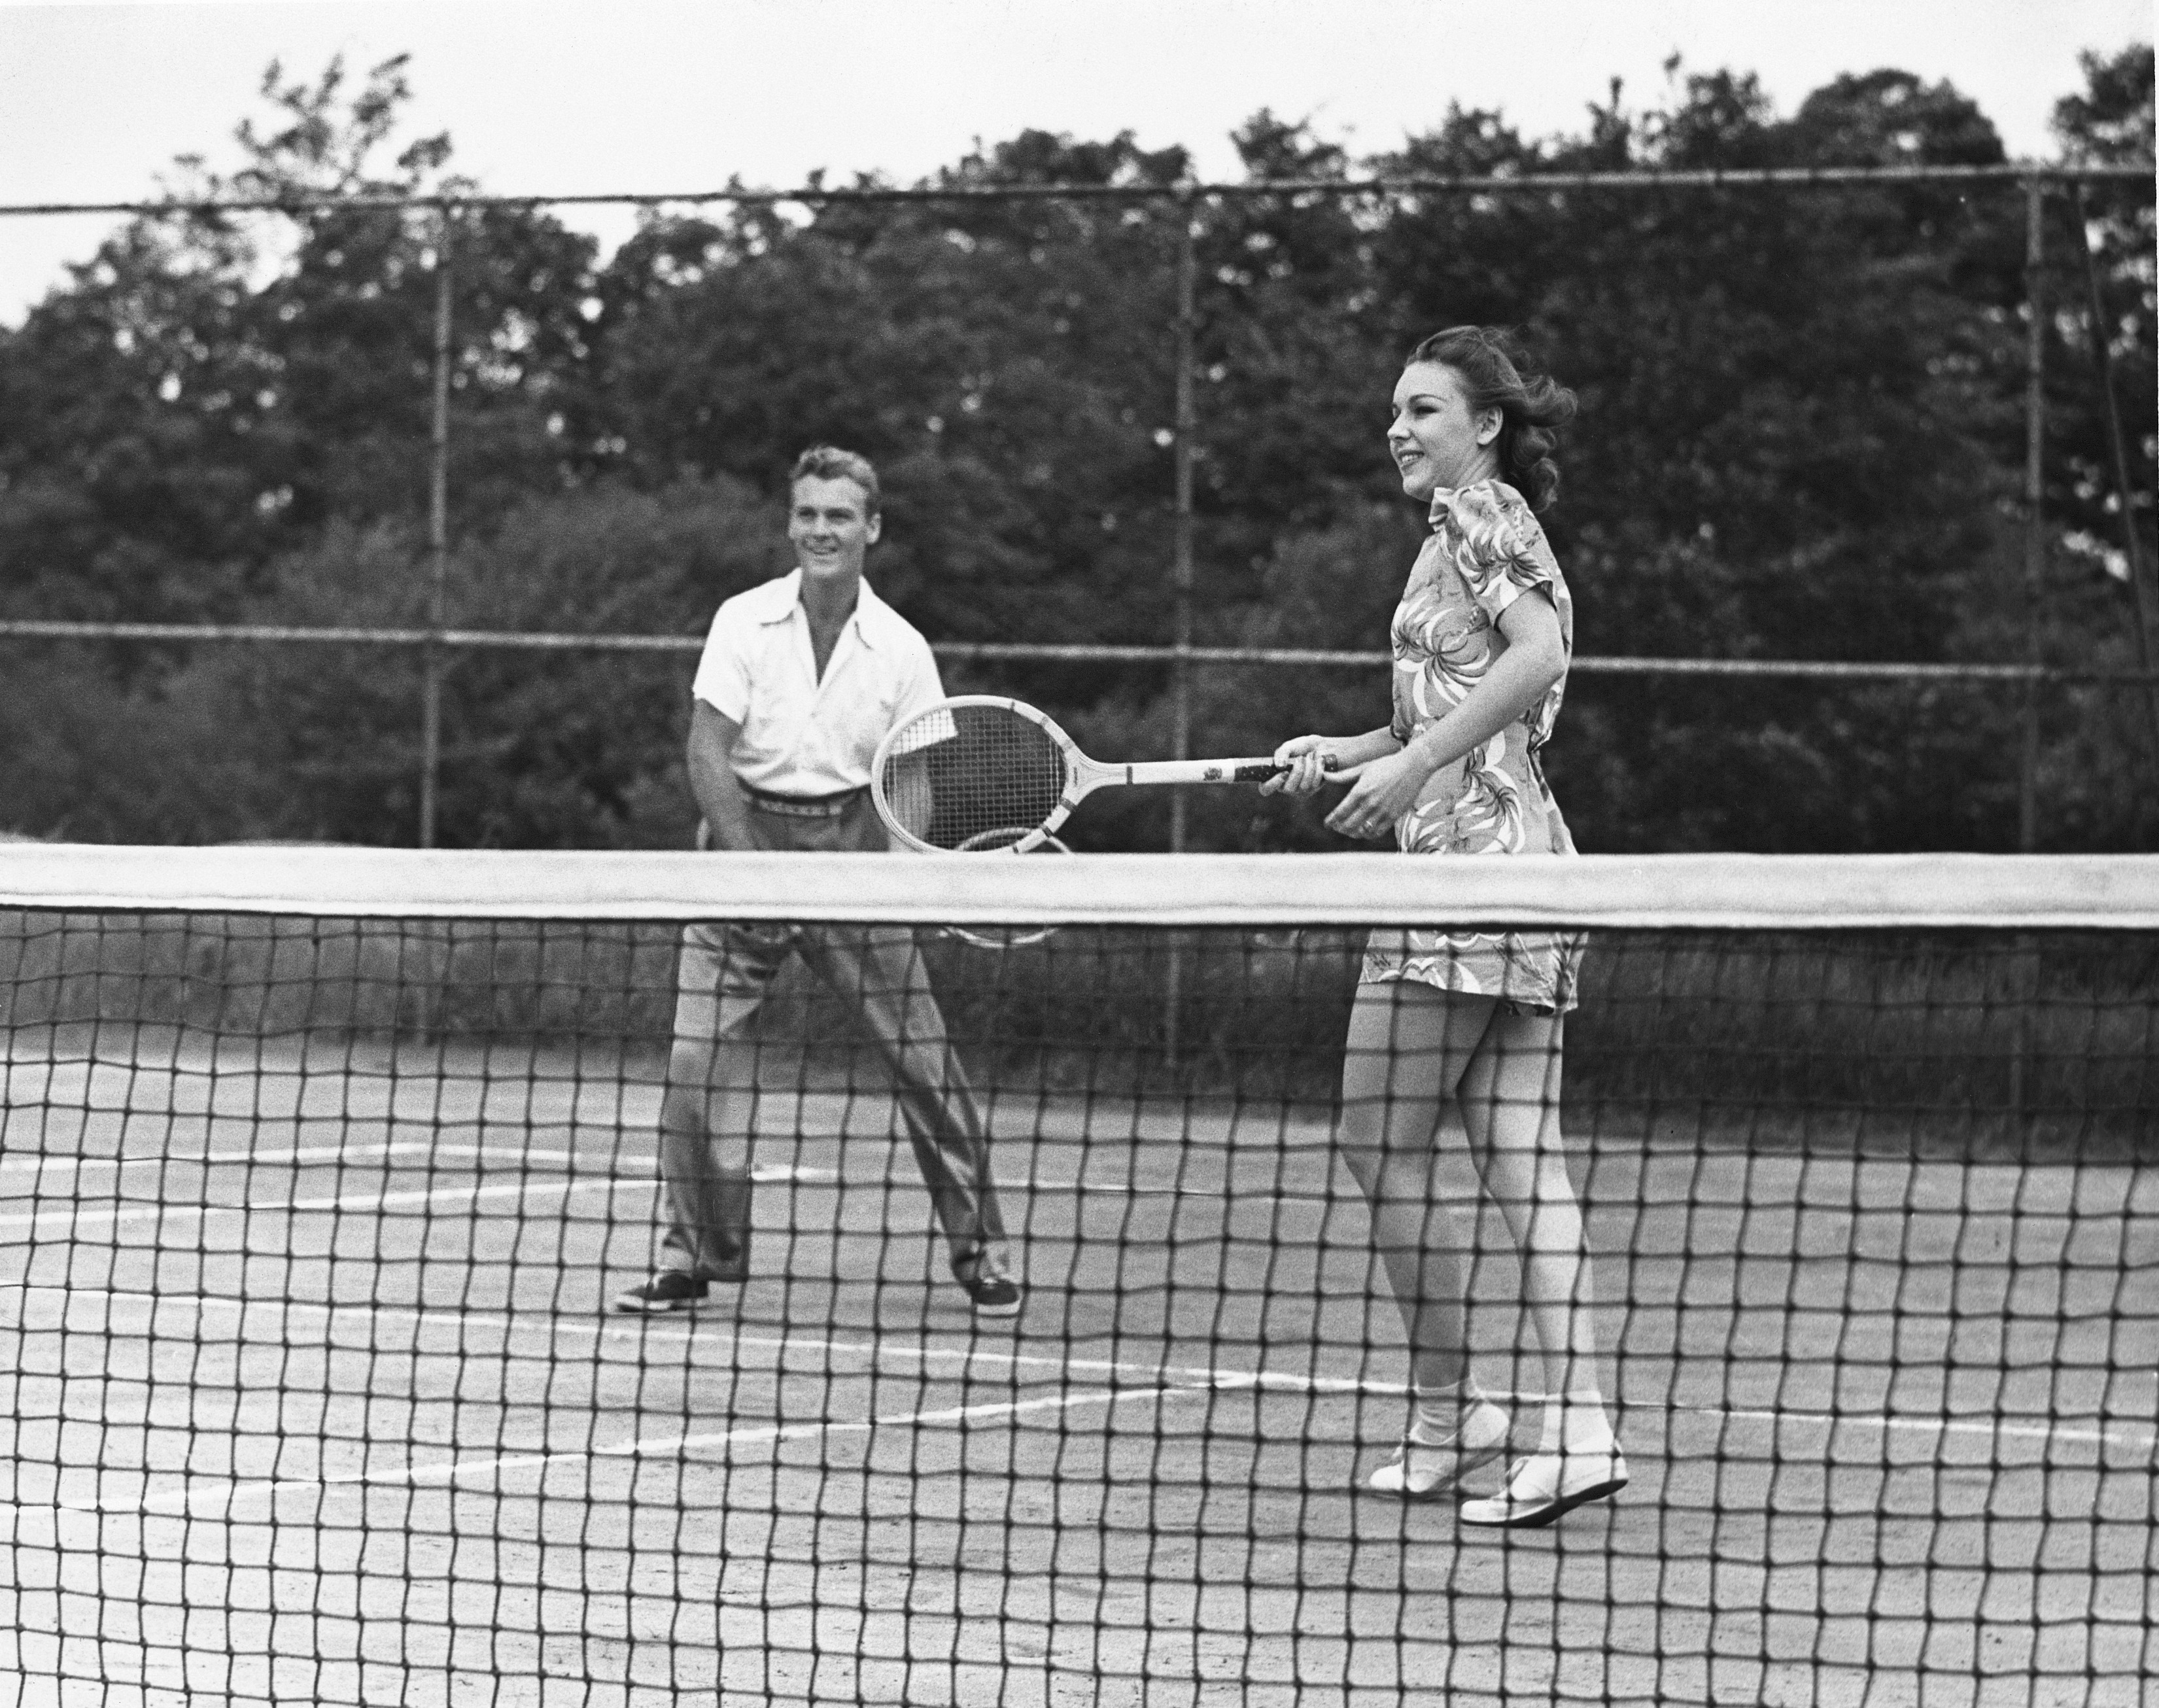 UNITED STATES - CIRCA 1950s: Couple playing tennis. (Photo by George Marks/Retrofile/Getty Images)